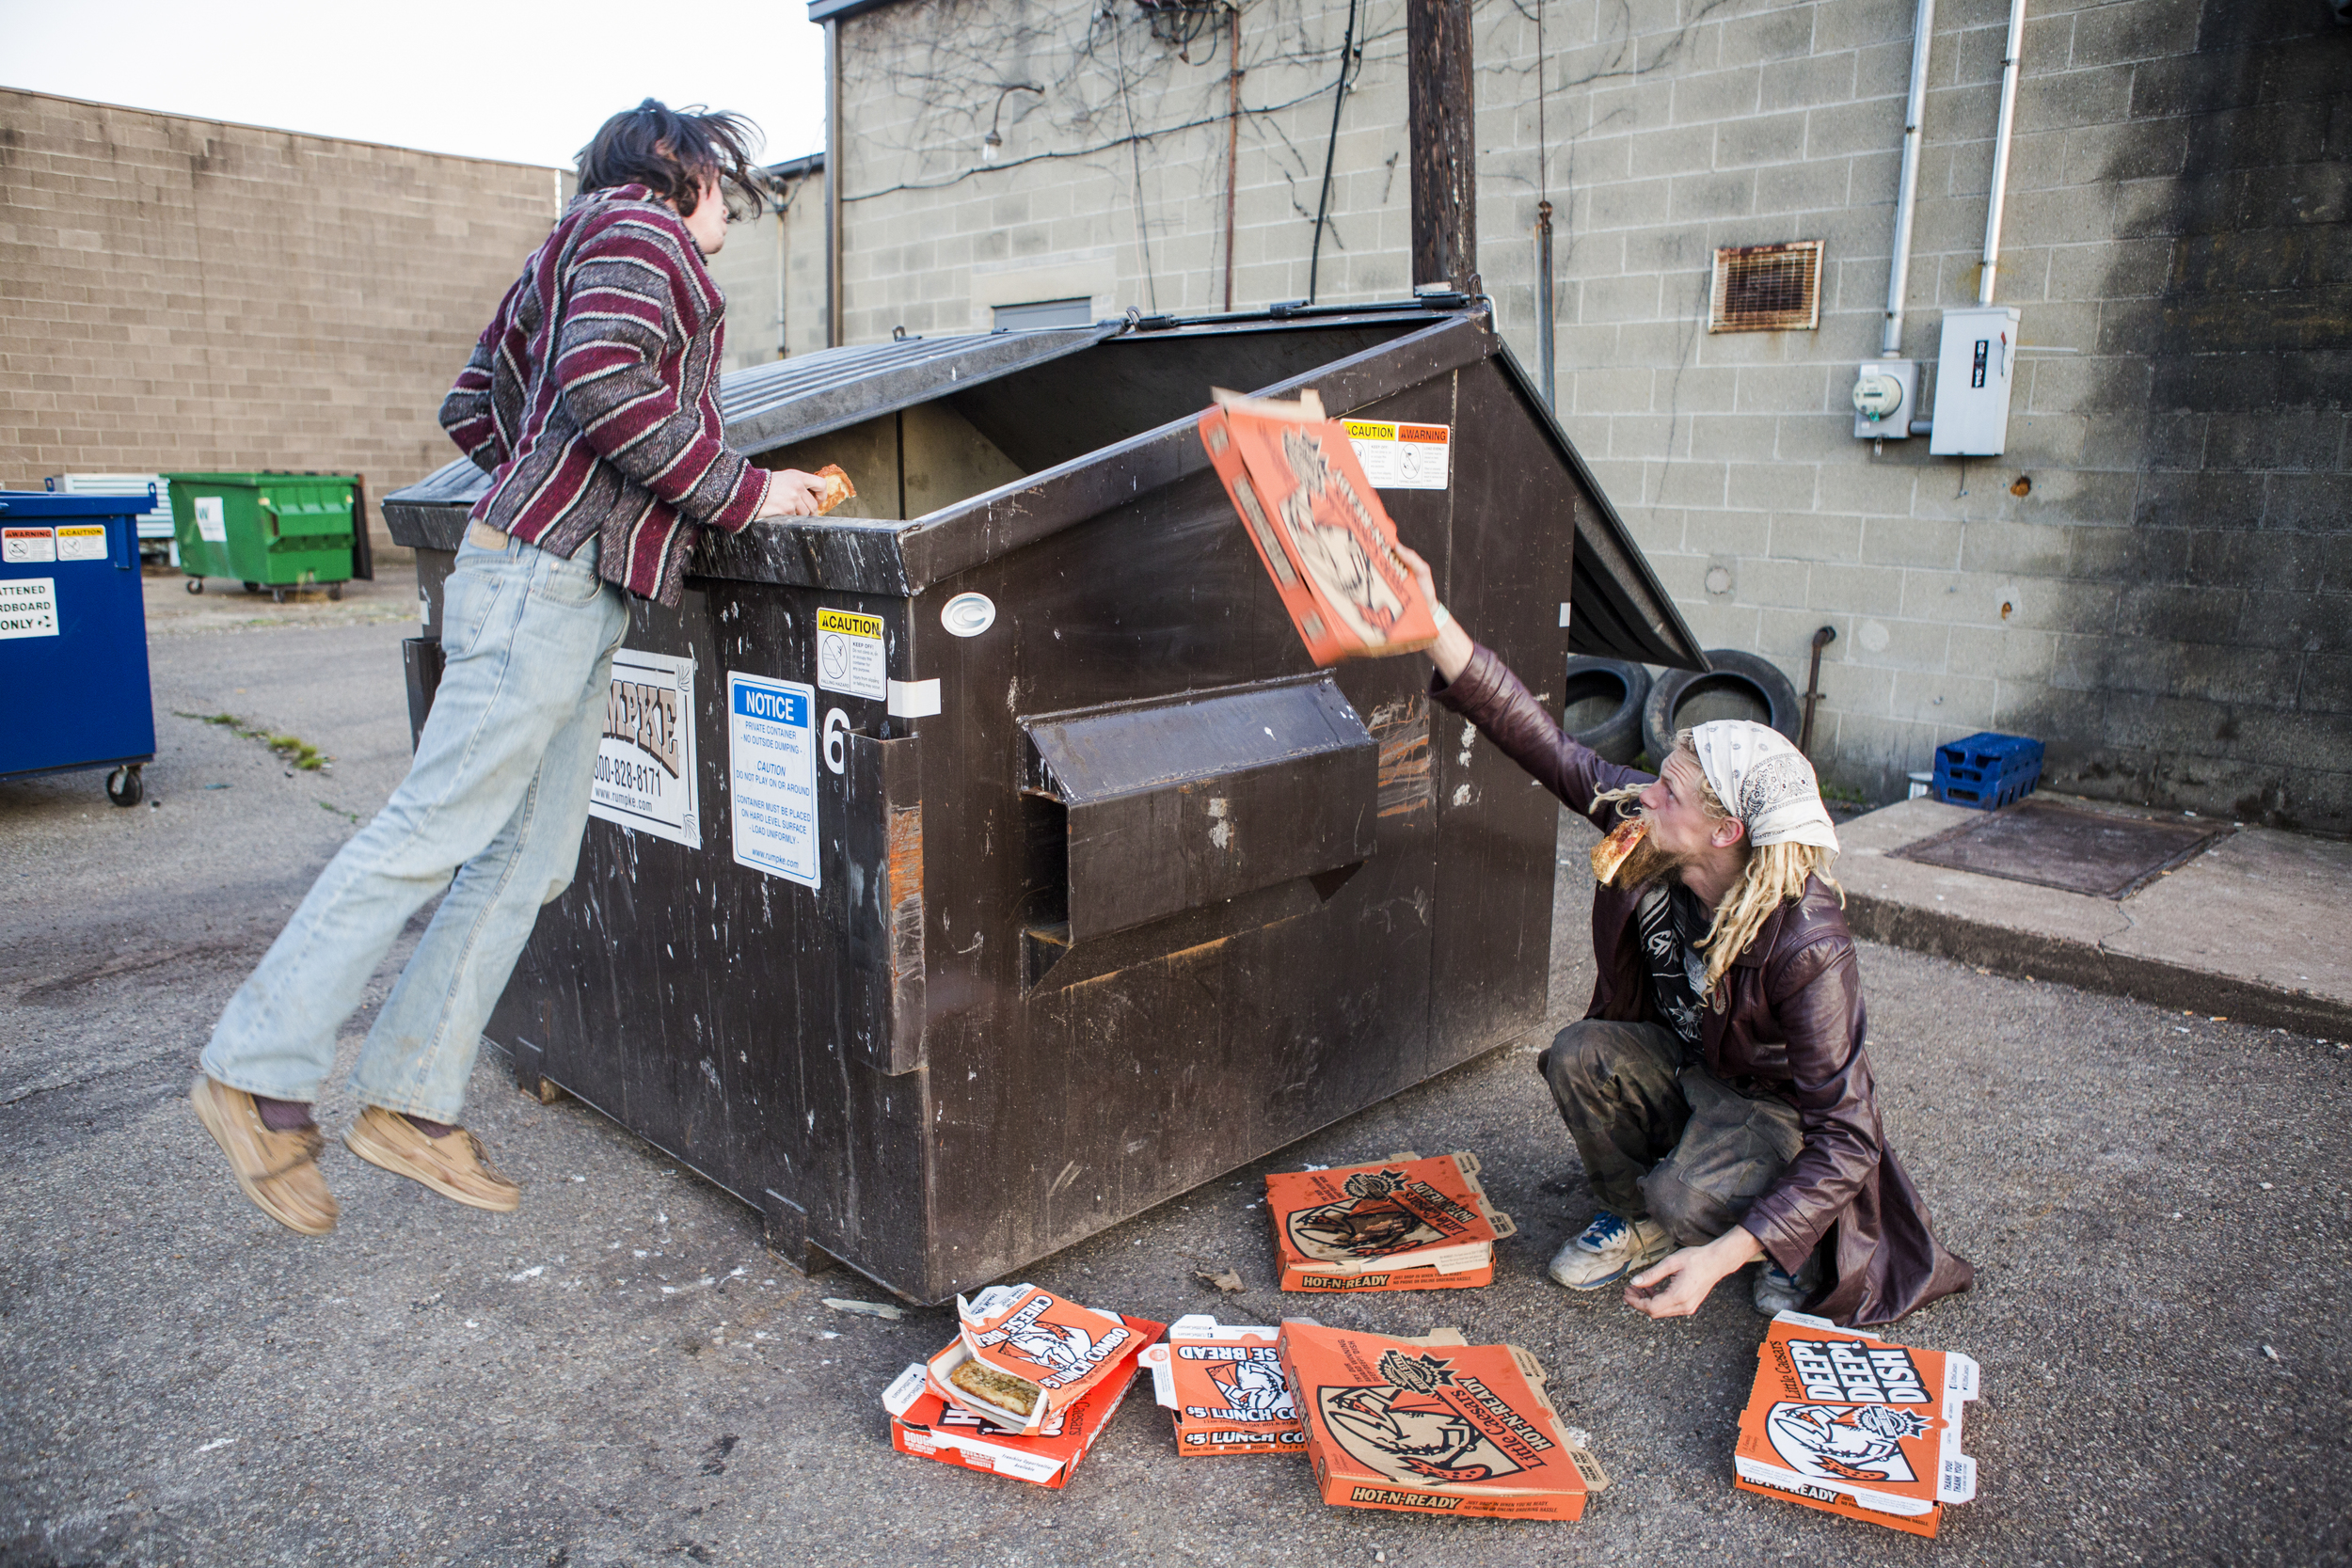  Riley Gates, left, and Solar, right, dumpster dive for Little Caesers pizza behind the shop in Athens, Ohio. The travelers don't stop at typical restaurants or grocery stores for food, but find most of it by dumpster diving and finding food. Their t